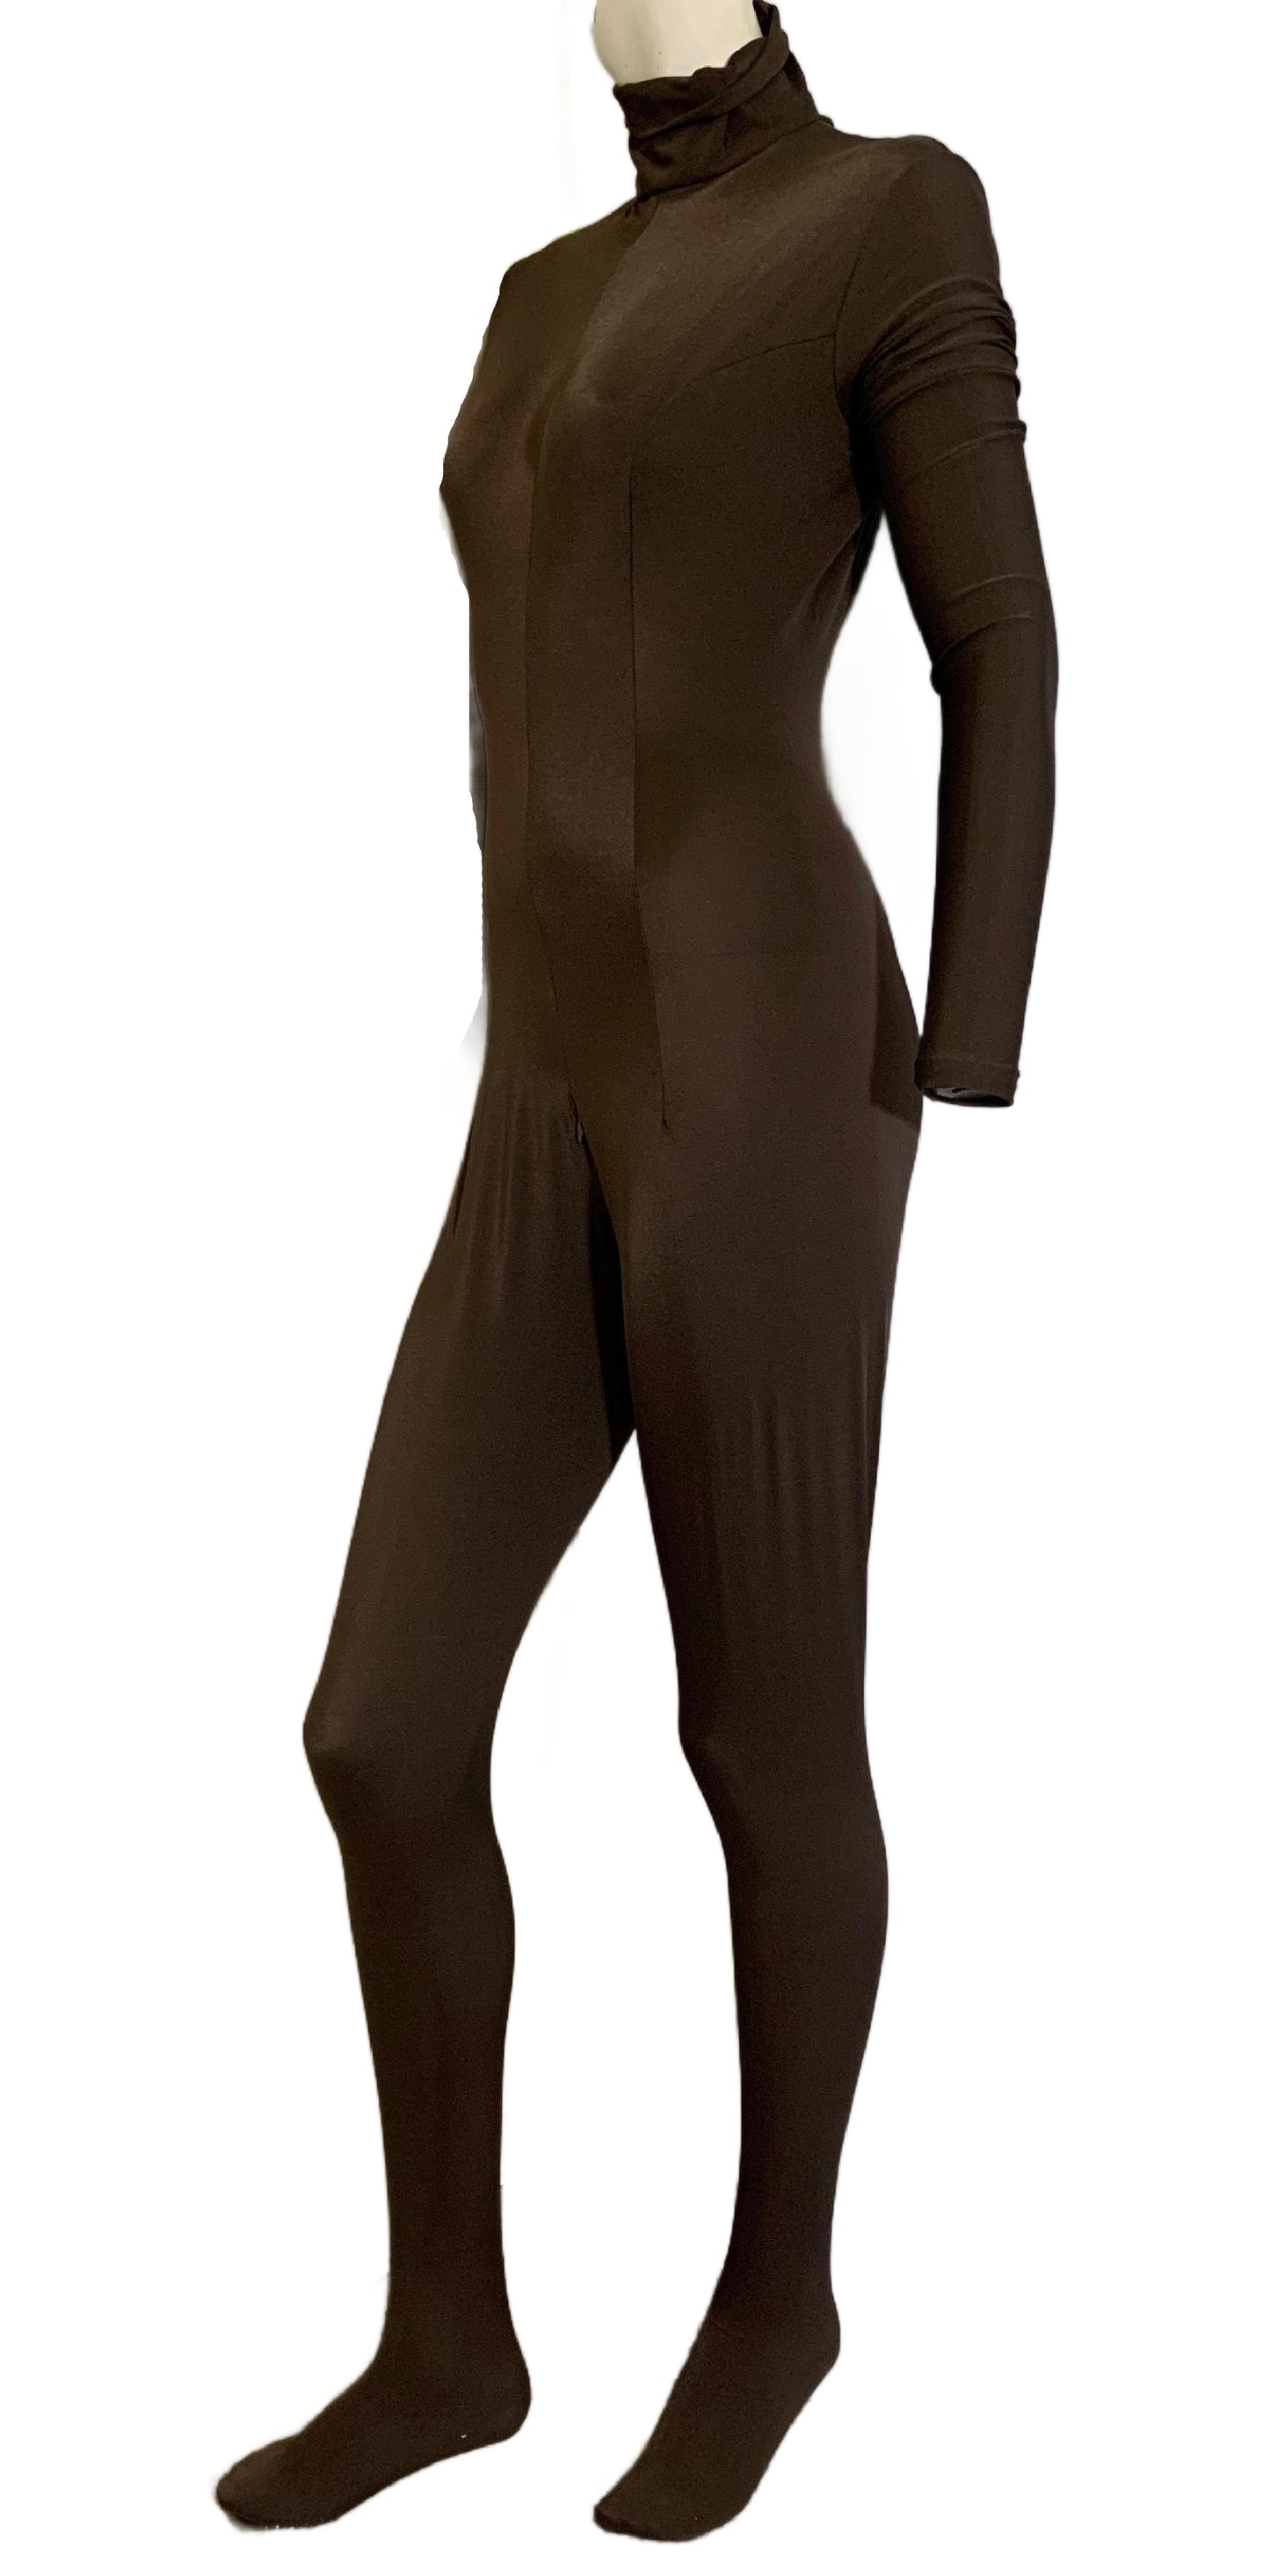 Cocoa Brown High Collar Long Sleeved Full Body Catsuit circa 1960s